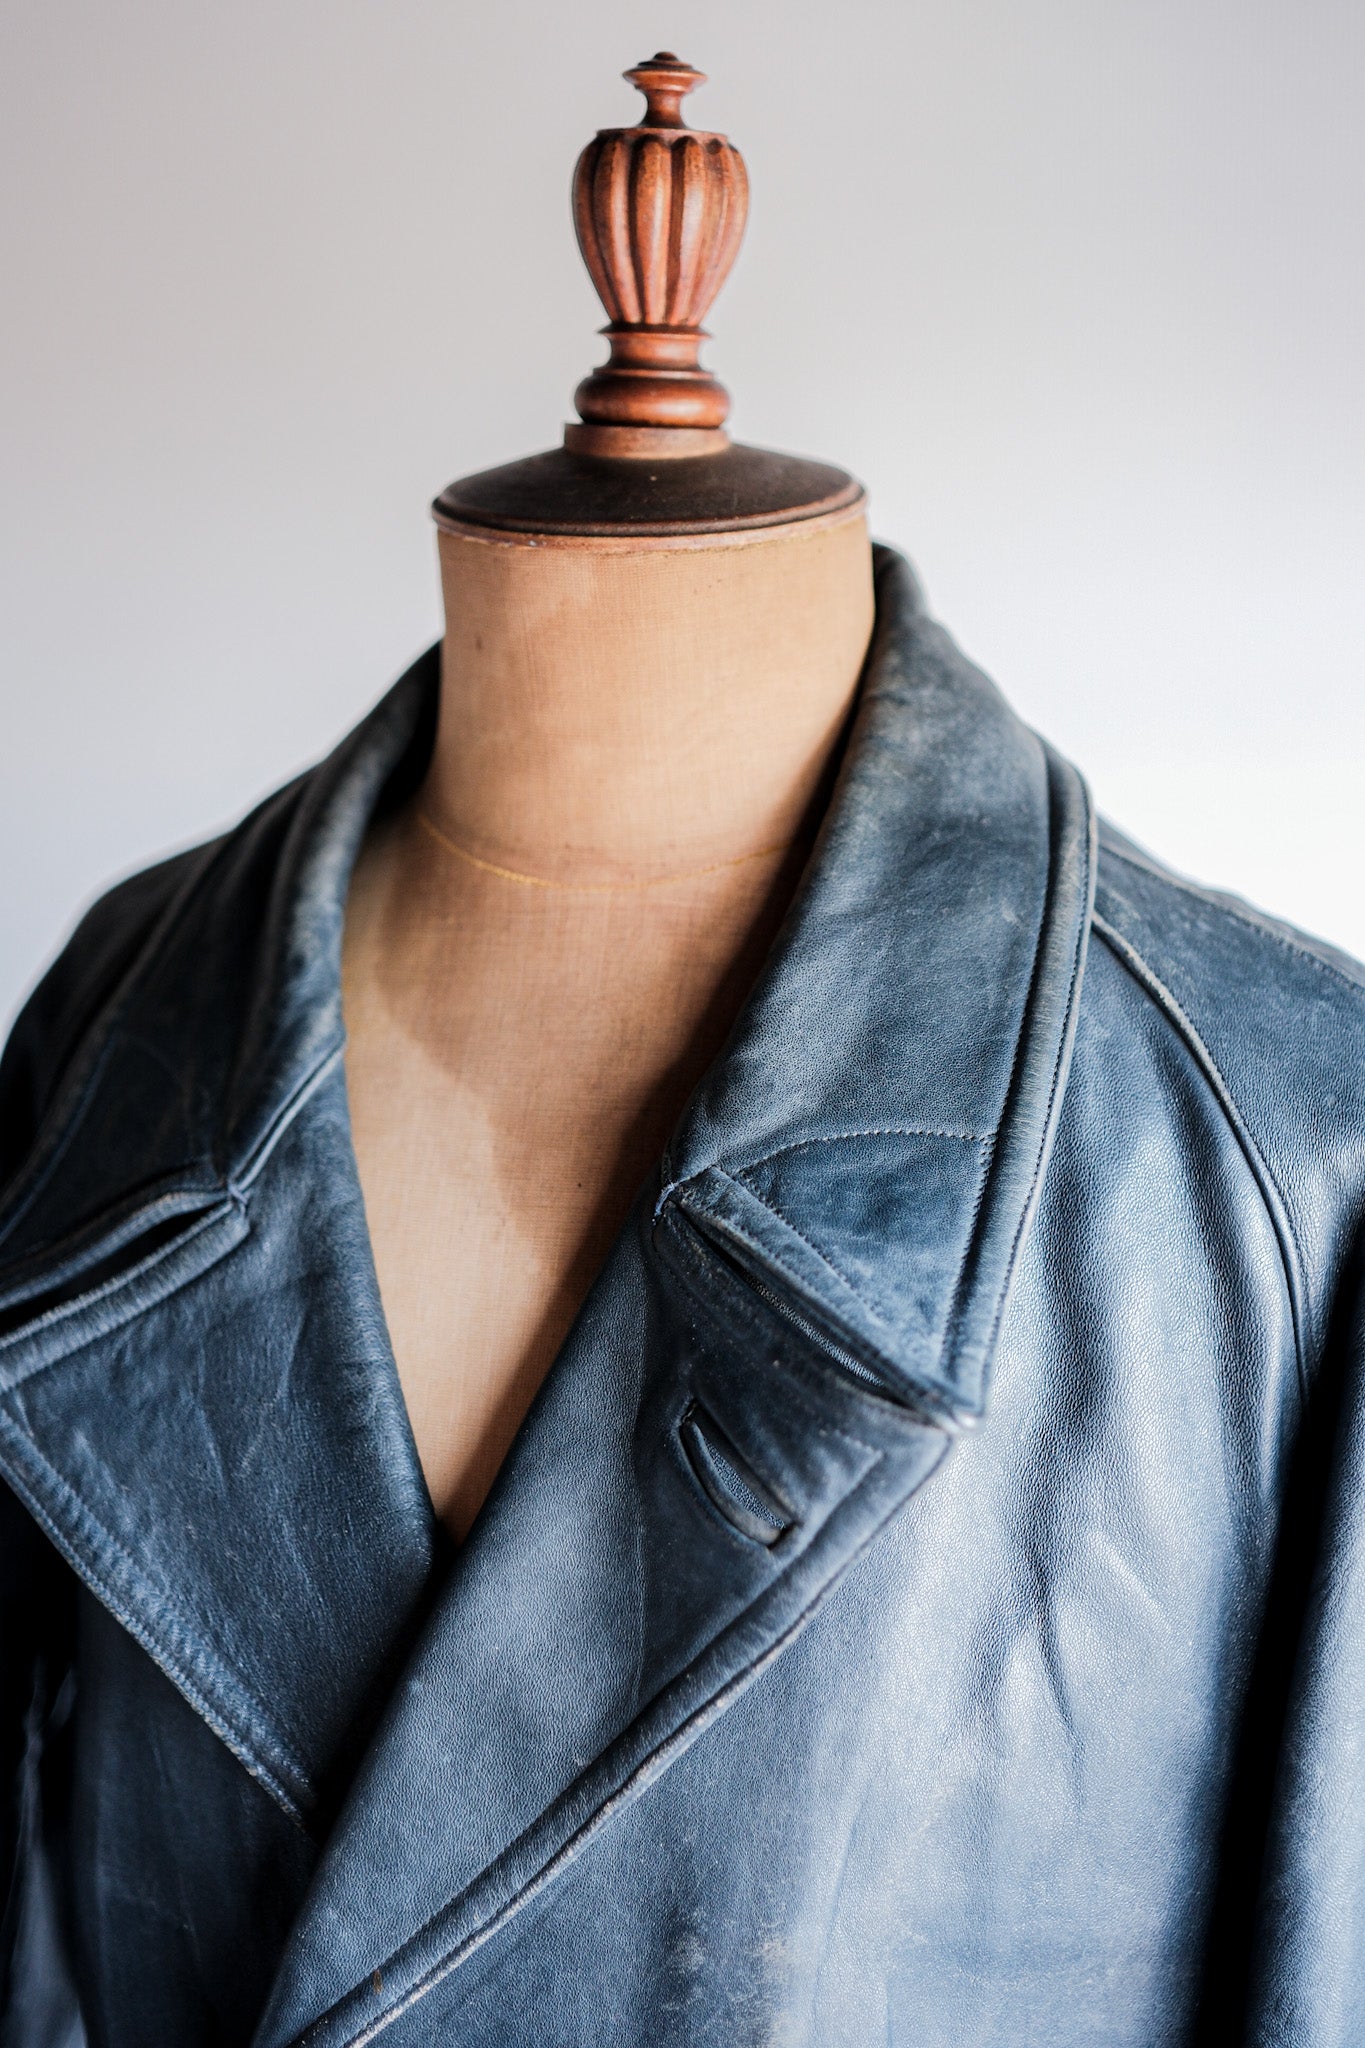 [~ 50's] French Vintage Double Breasted Leather Work COAT WITH CHITH CHIN STRAP